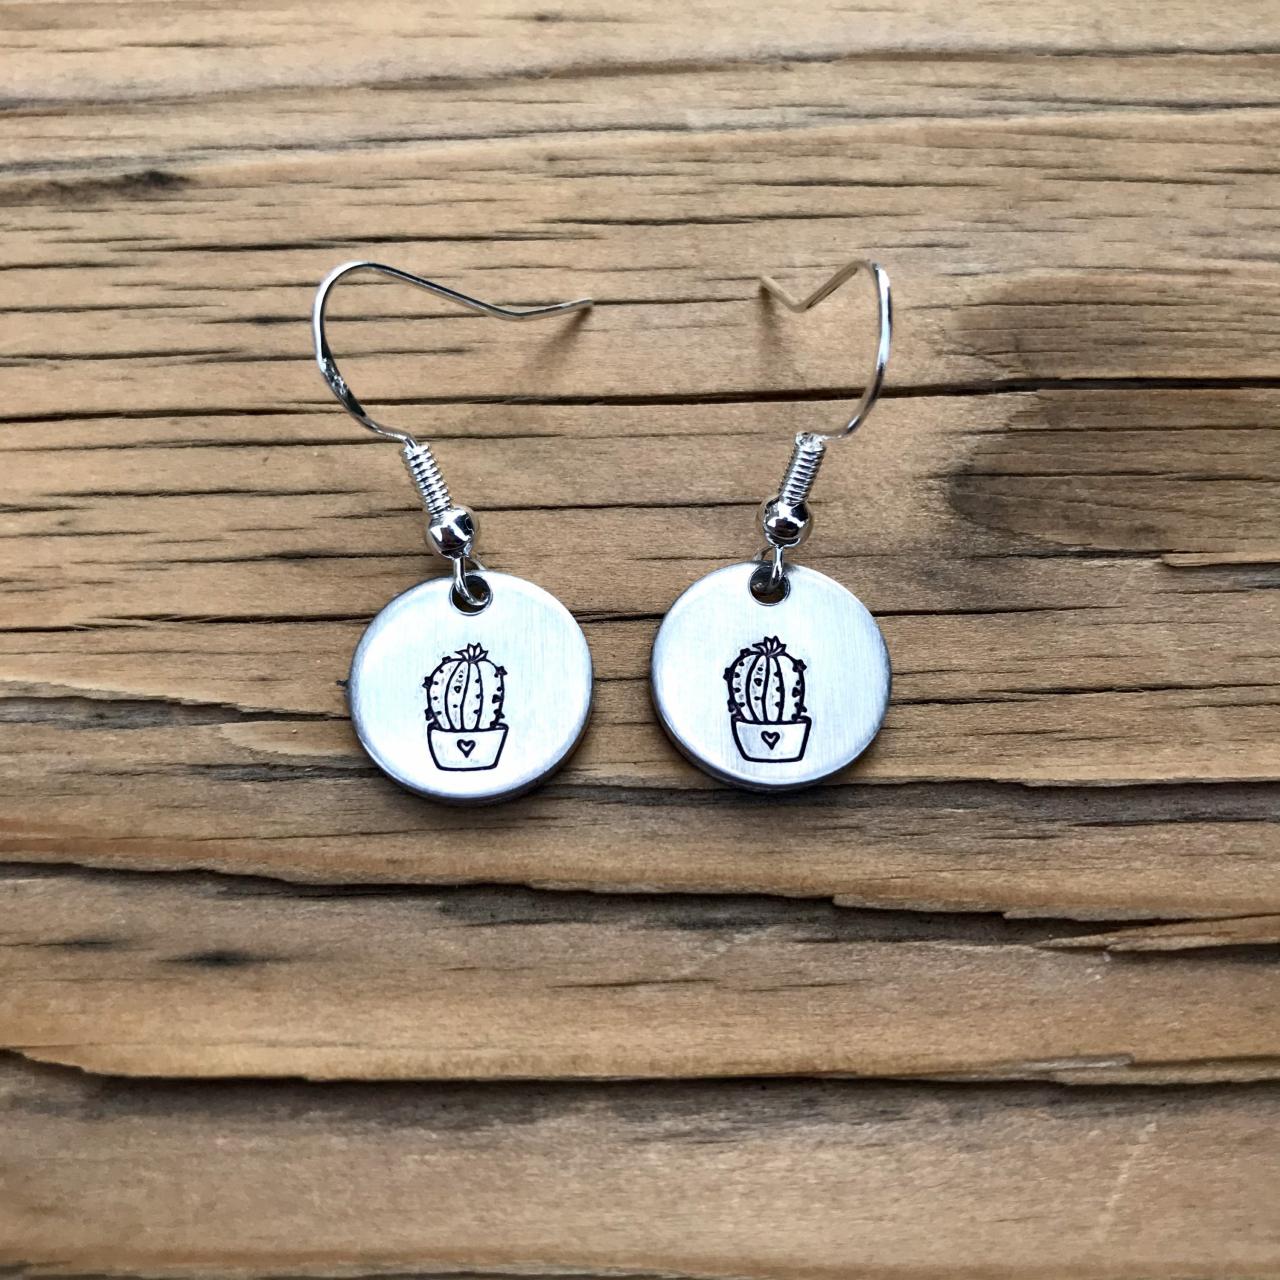 Earrings, Silver Cactus plant Earrings, jewelry aluminum, hand stamped